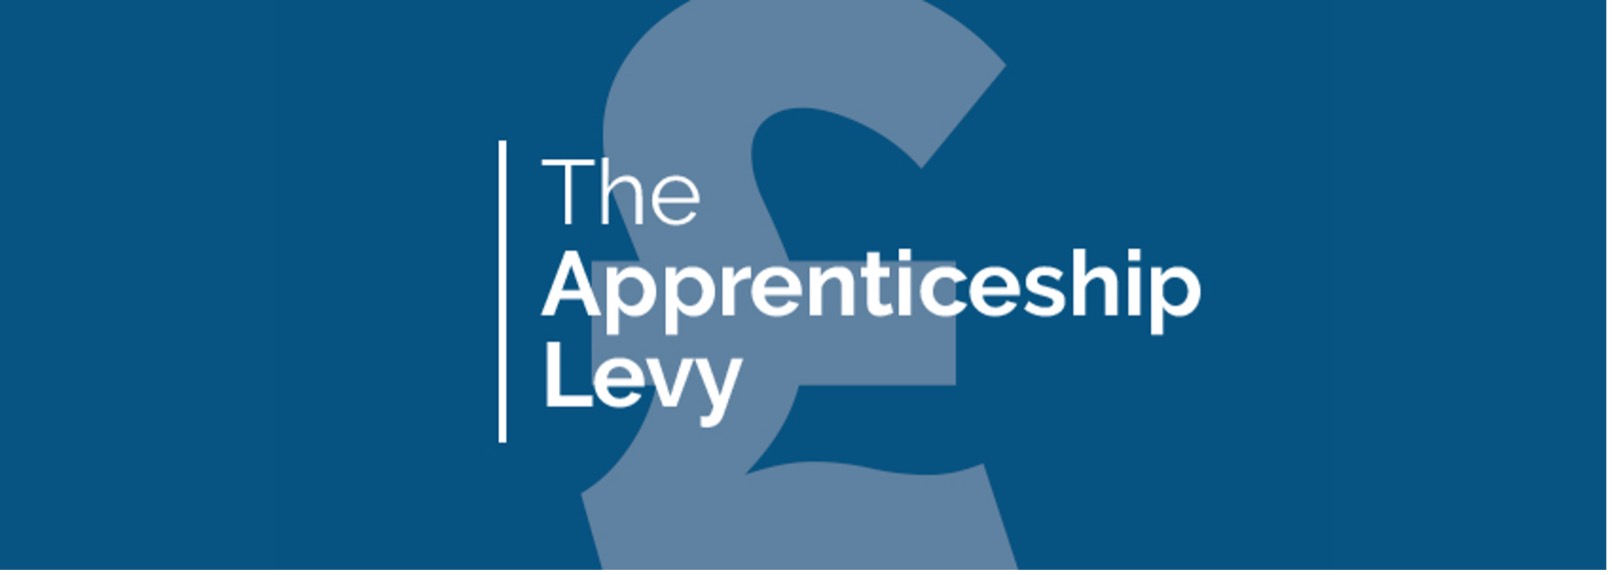 The text 'The Apprenticeship Levy' on a dark blue background